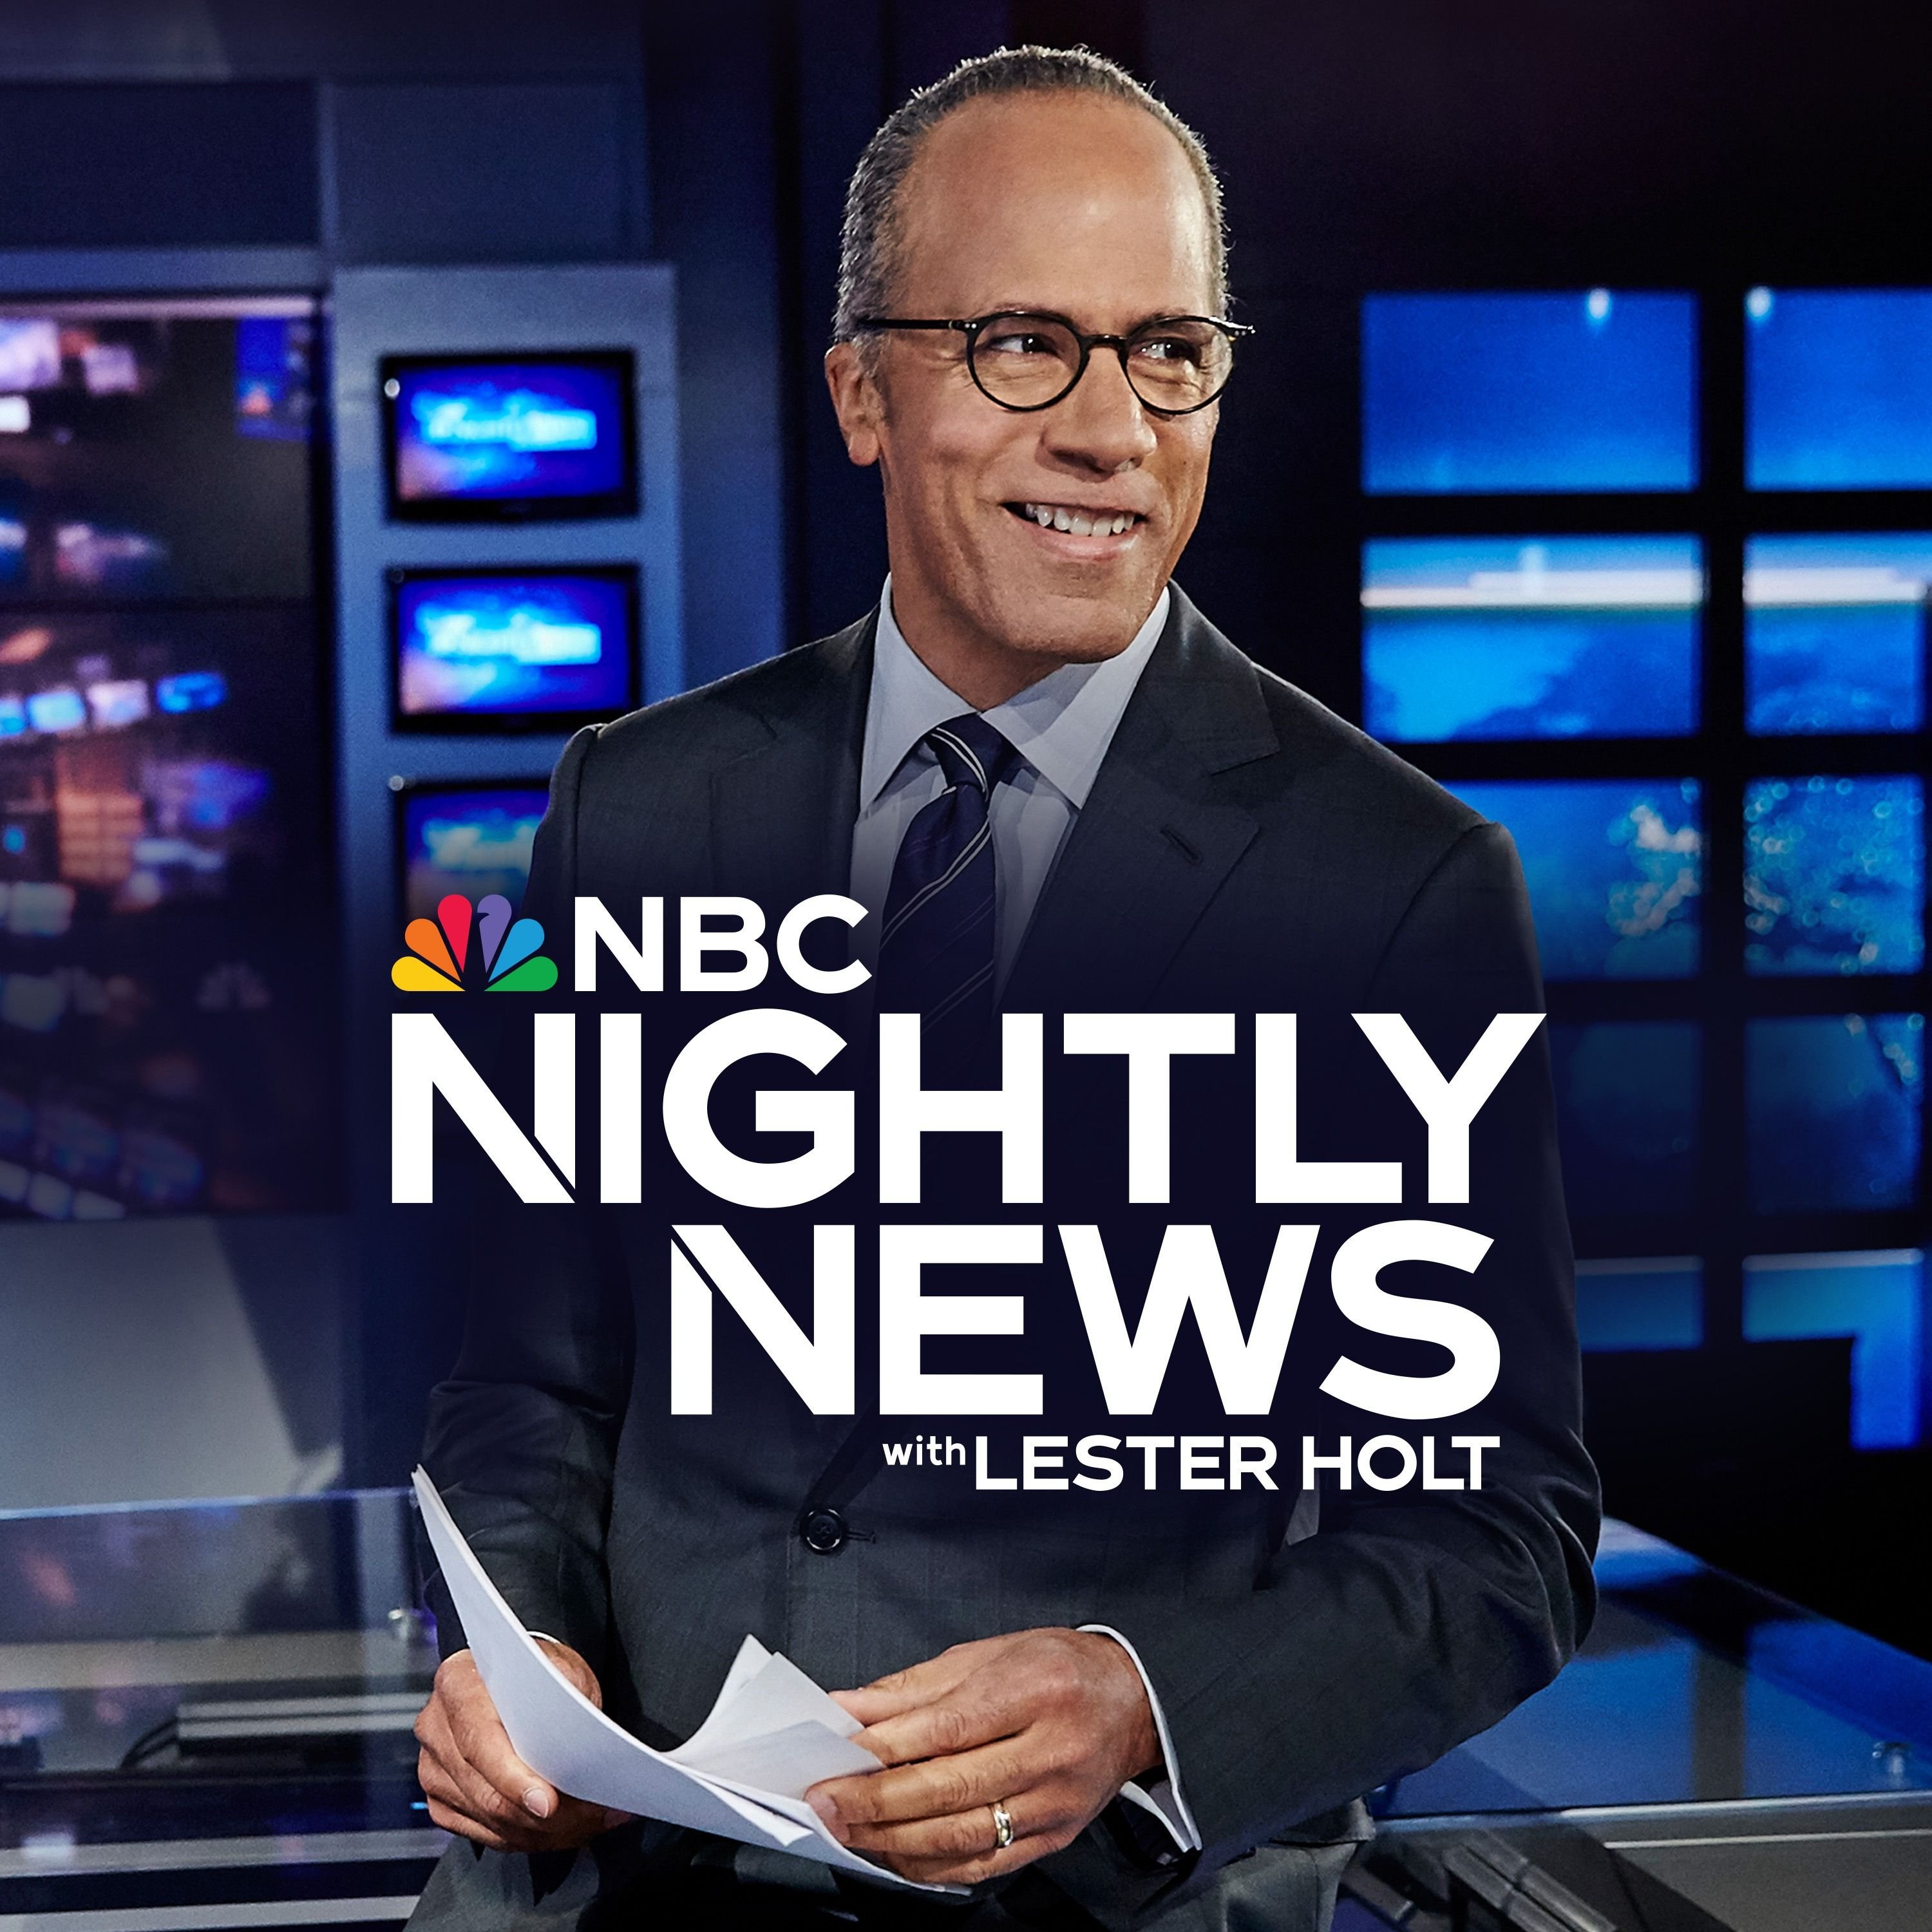 Listener Numbers, Contacts, Similar Podcasts - NBC Nightly News